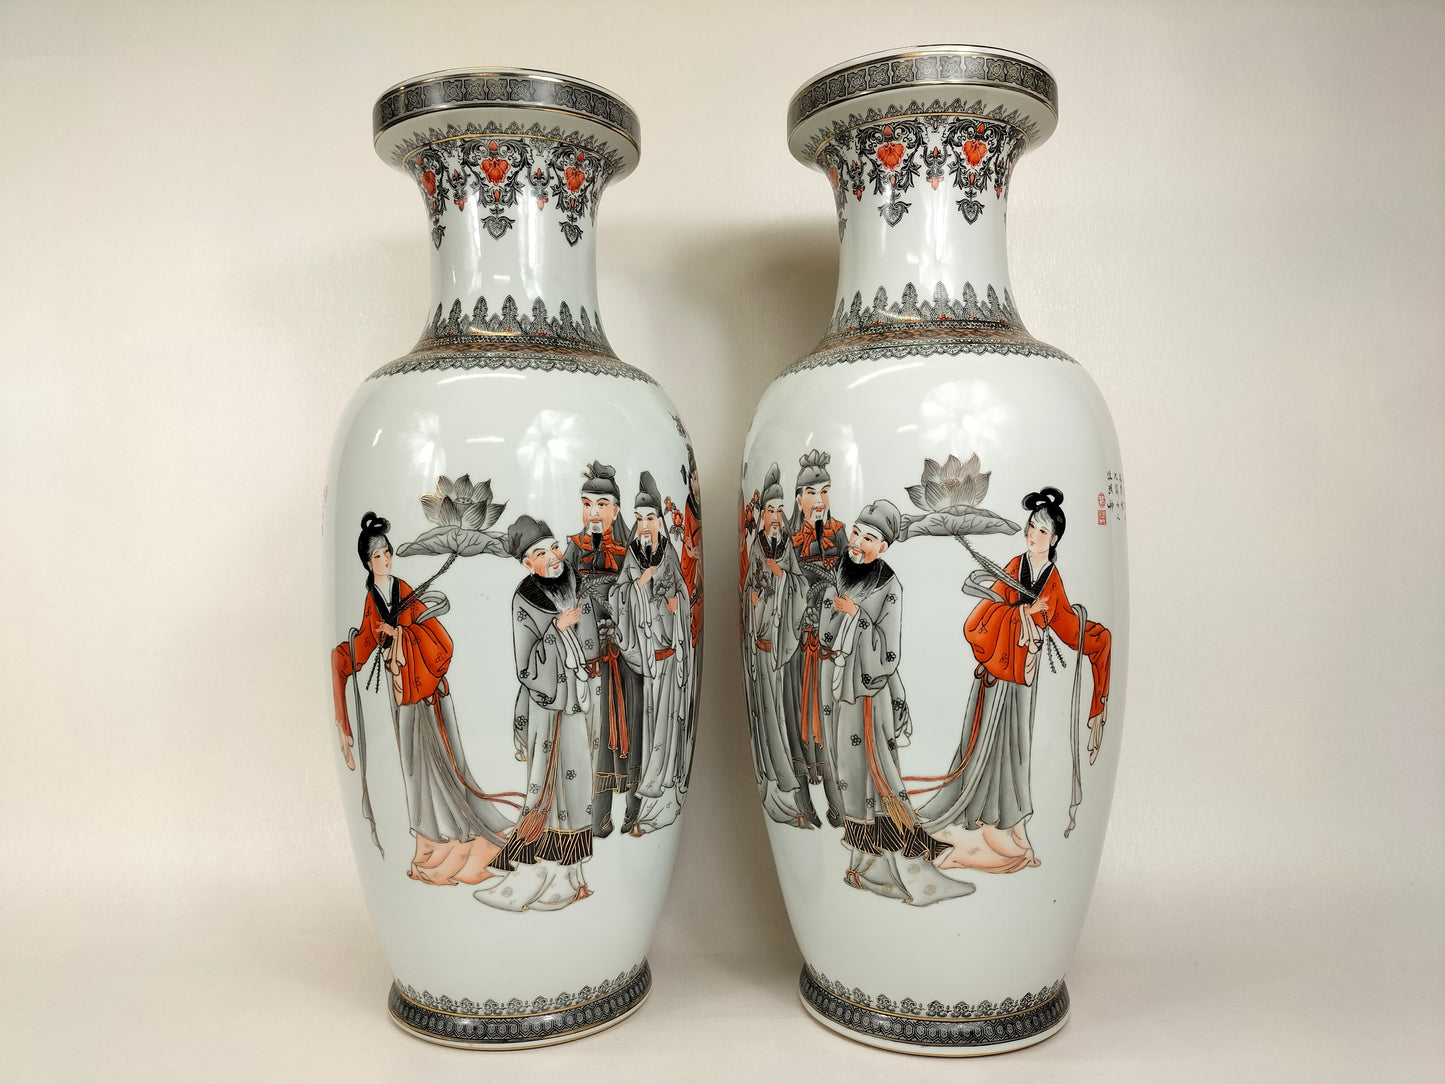 Pair of large Chinese vases decorated with figures // Jingdezhen - Qianlong mark - 20th century